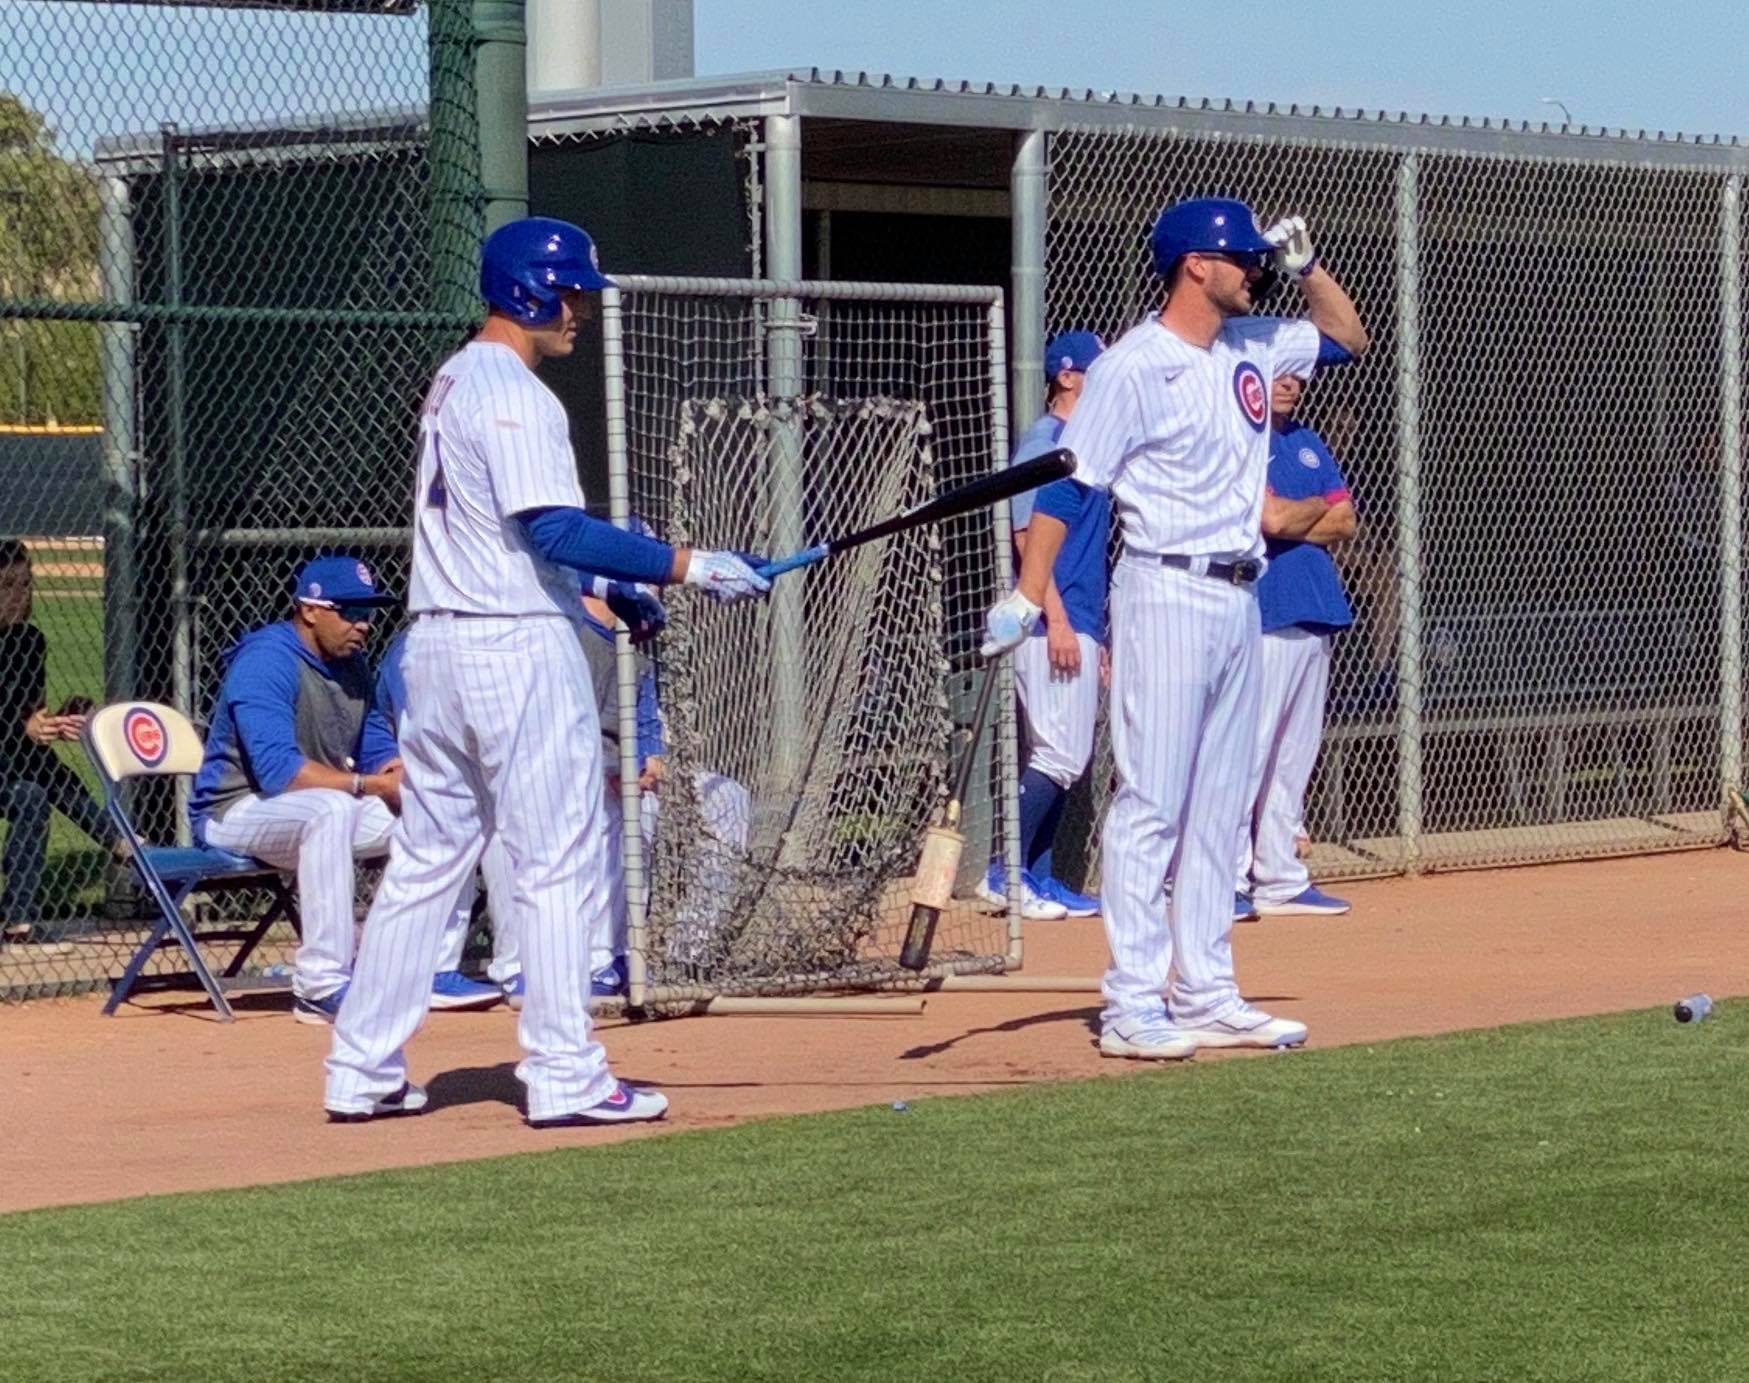 Cubs Baseball Photo of chicago and springtraining and Anthony Rizzo and Kris Bryant